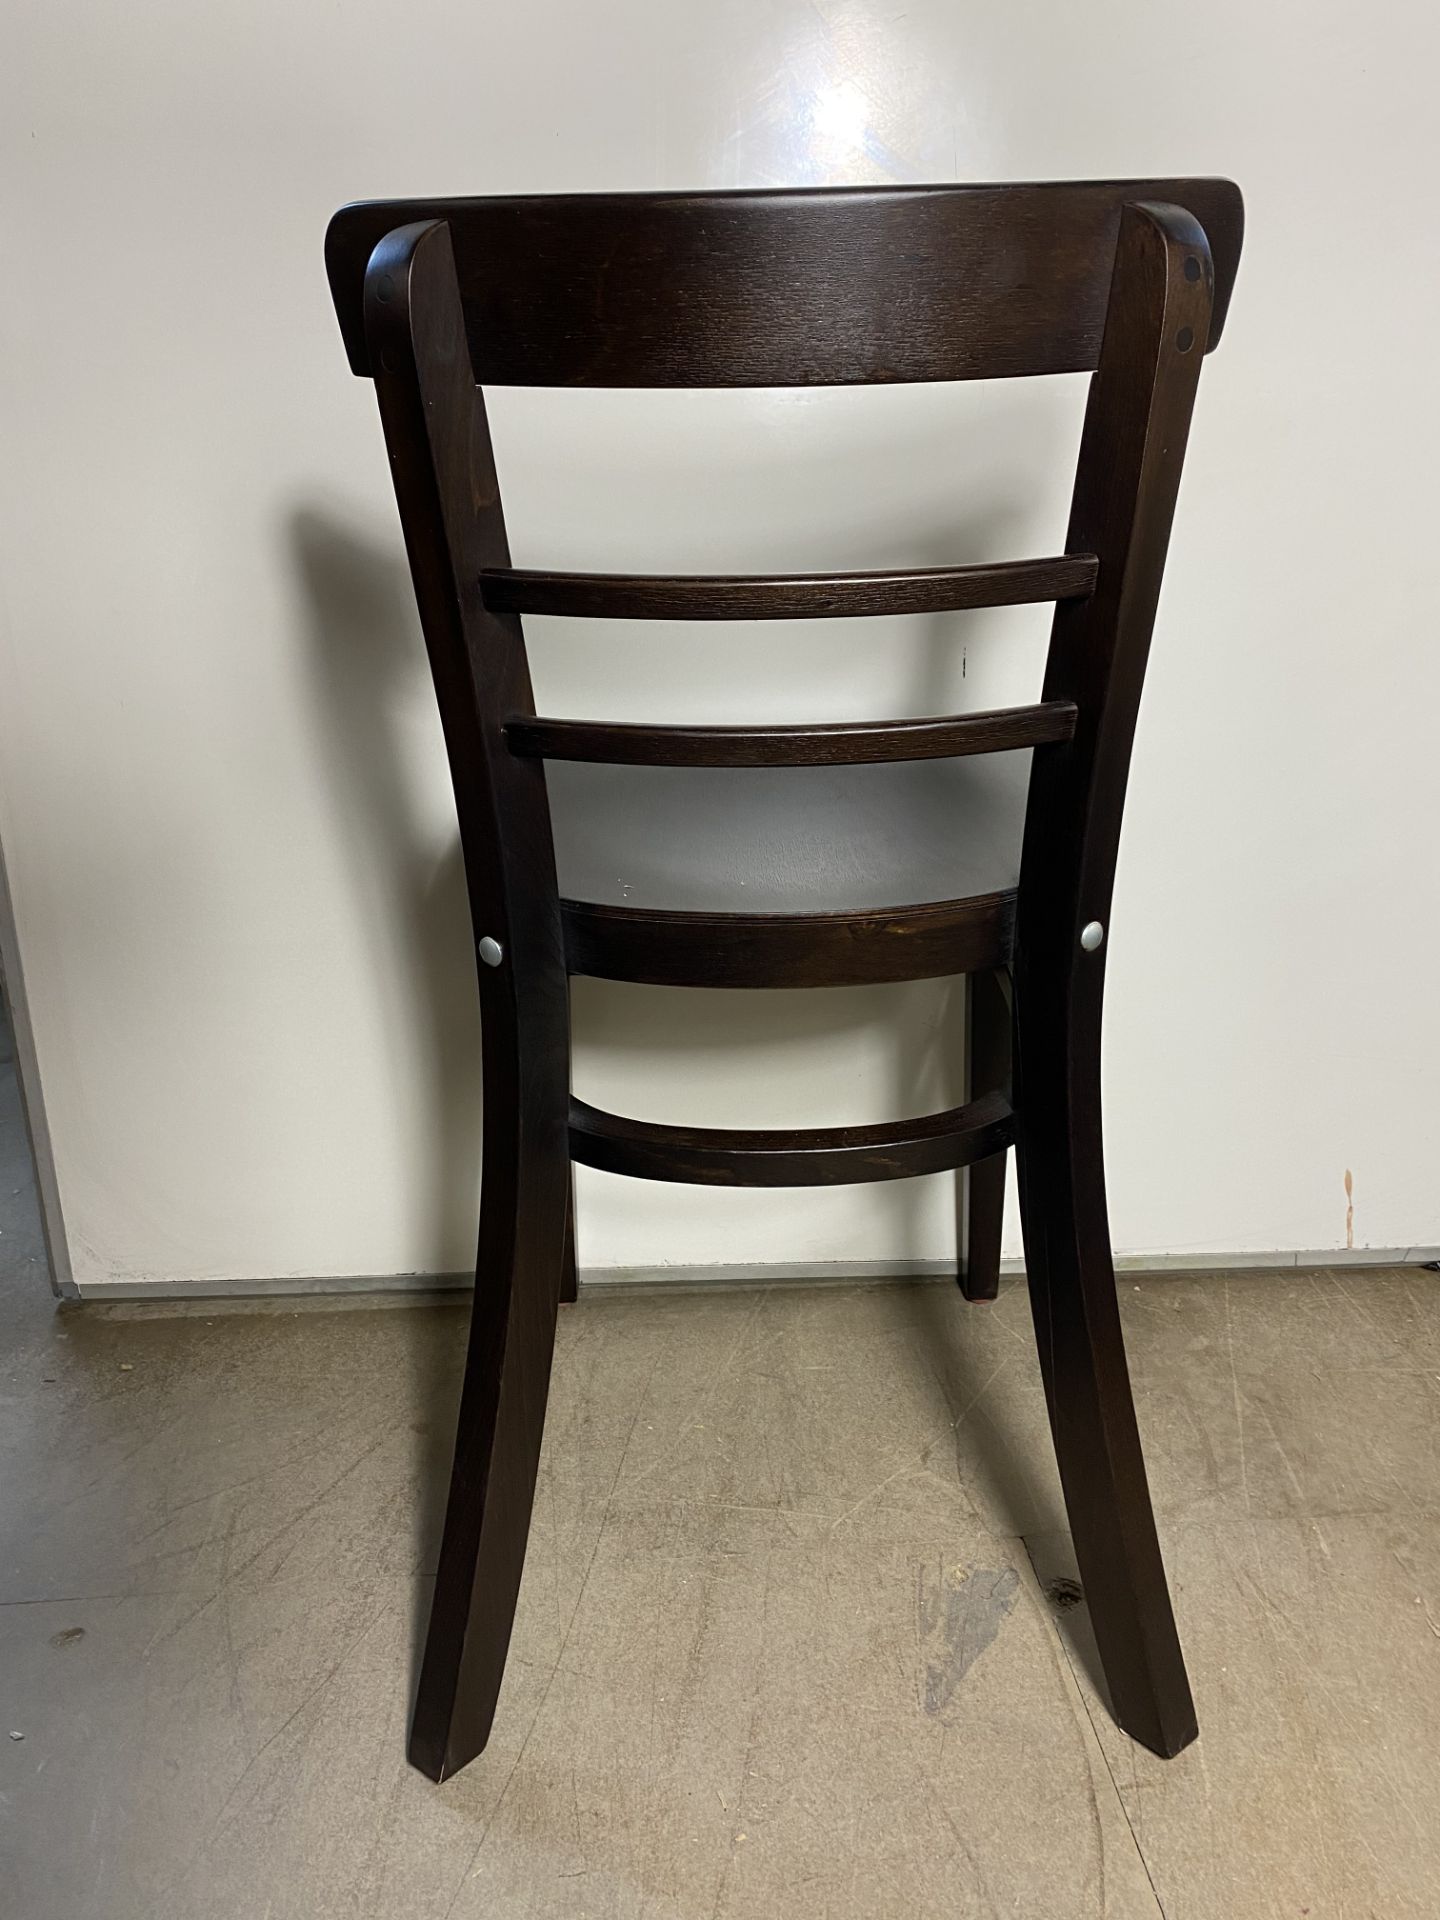 4 x Espresso Side Chairs | BE 3057983 - Image 4 of 6